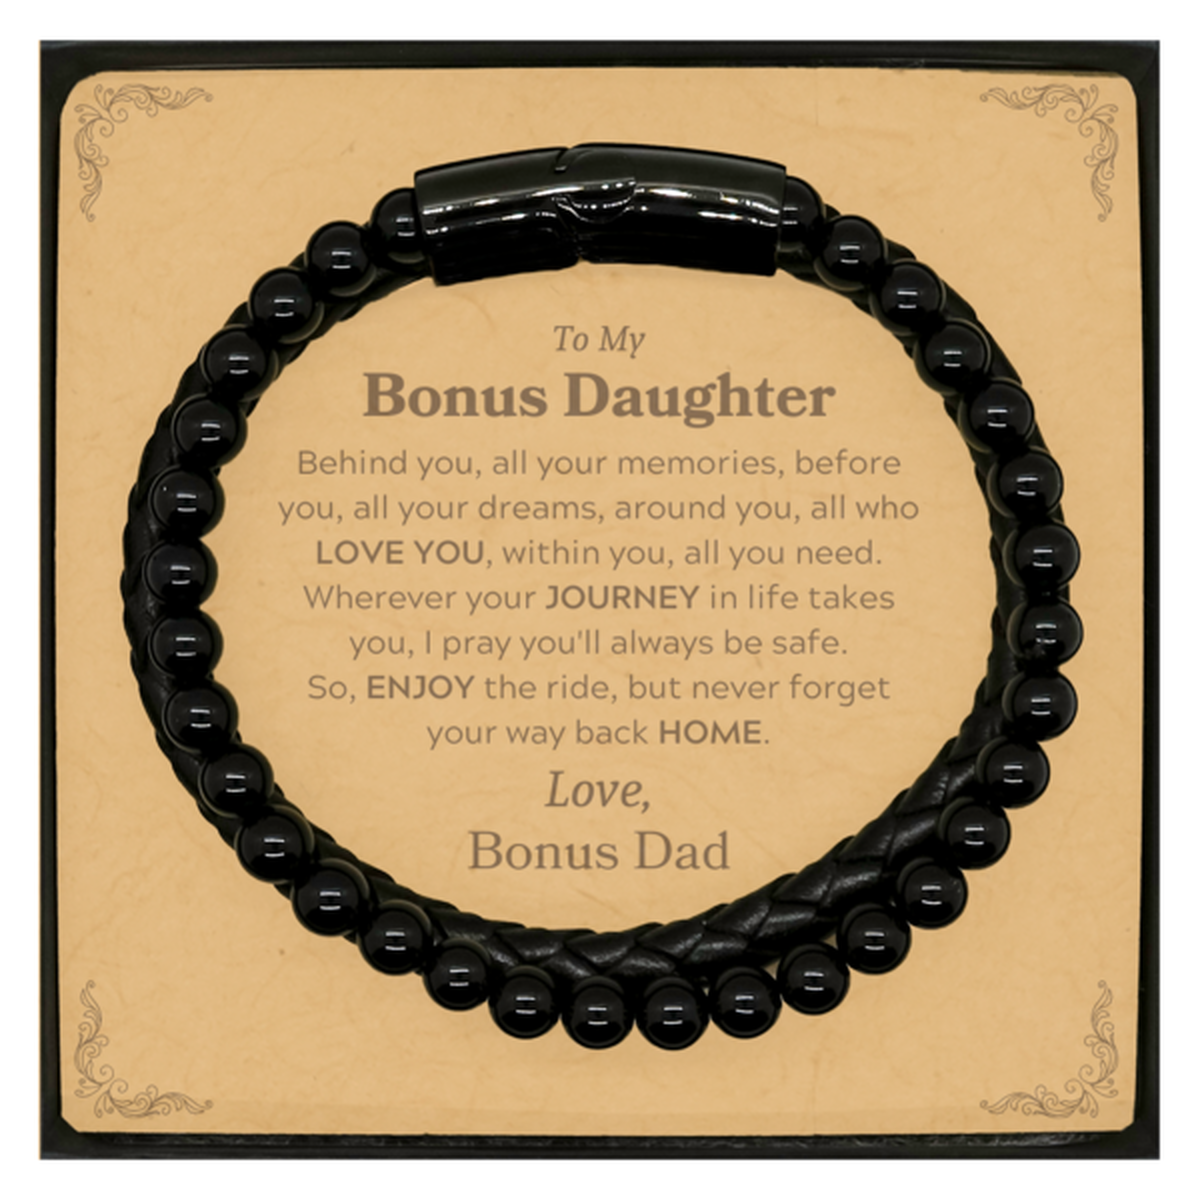 To My Bonus Daughter Graduation Gifts from Bonus Dad, Bonus Daughter Stone Leather Bracelets Christmas Birthday Gifts for Bonus Daughter Behind you, all your memories, before you, all your dreams. Love, Bonus Dad